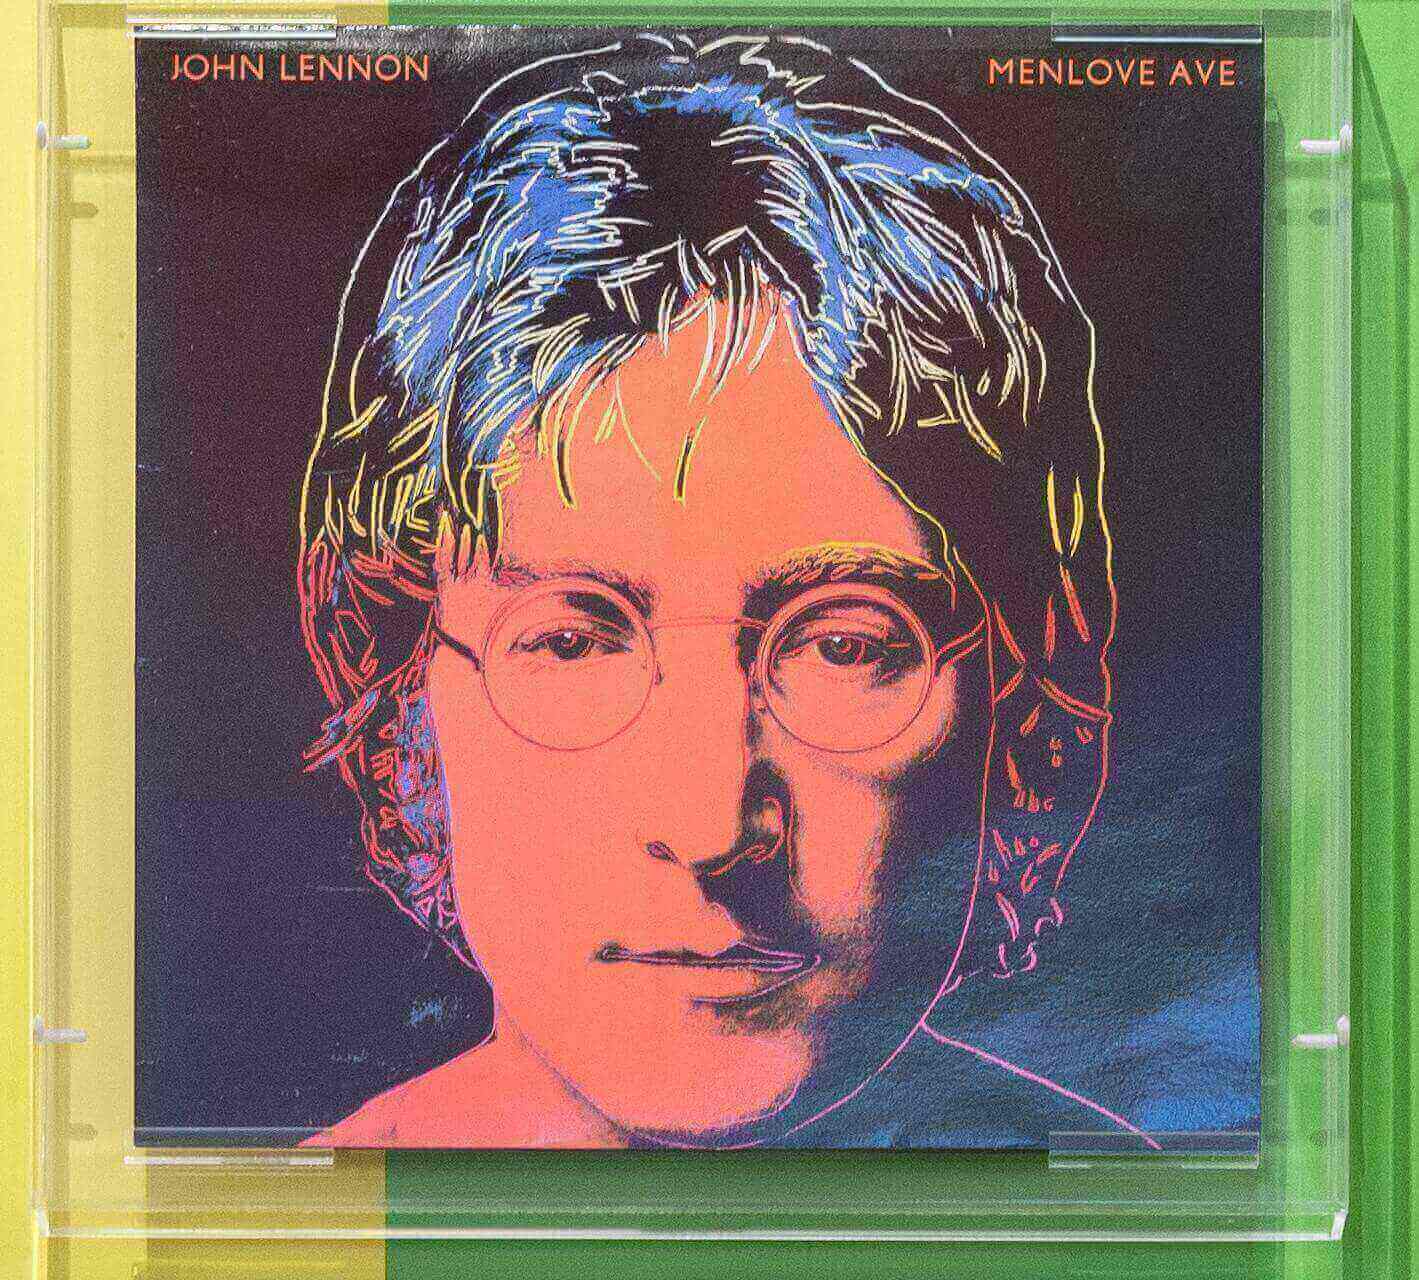 You are currently viewing 1 John Lennon Album Has Andy Warhol Cover Art